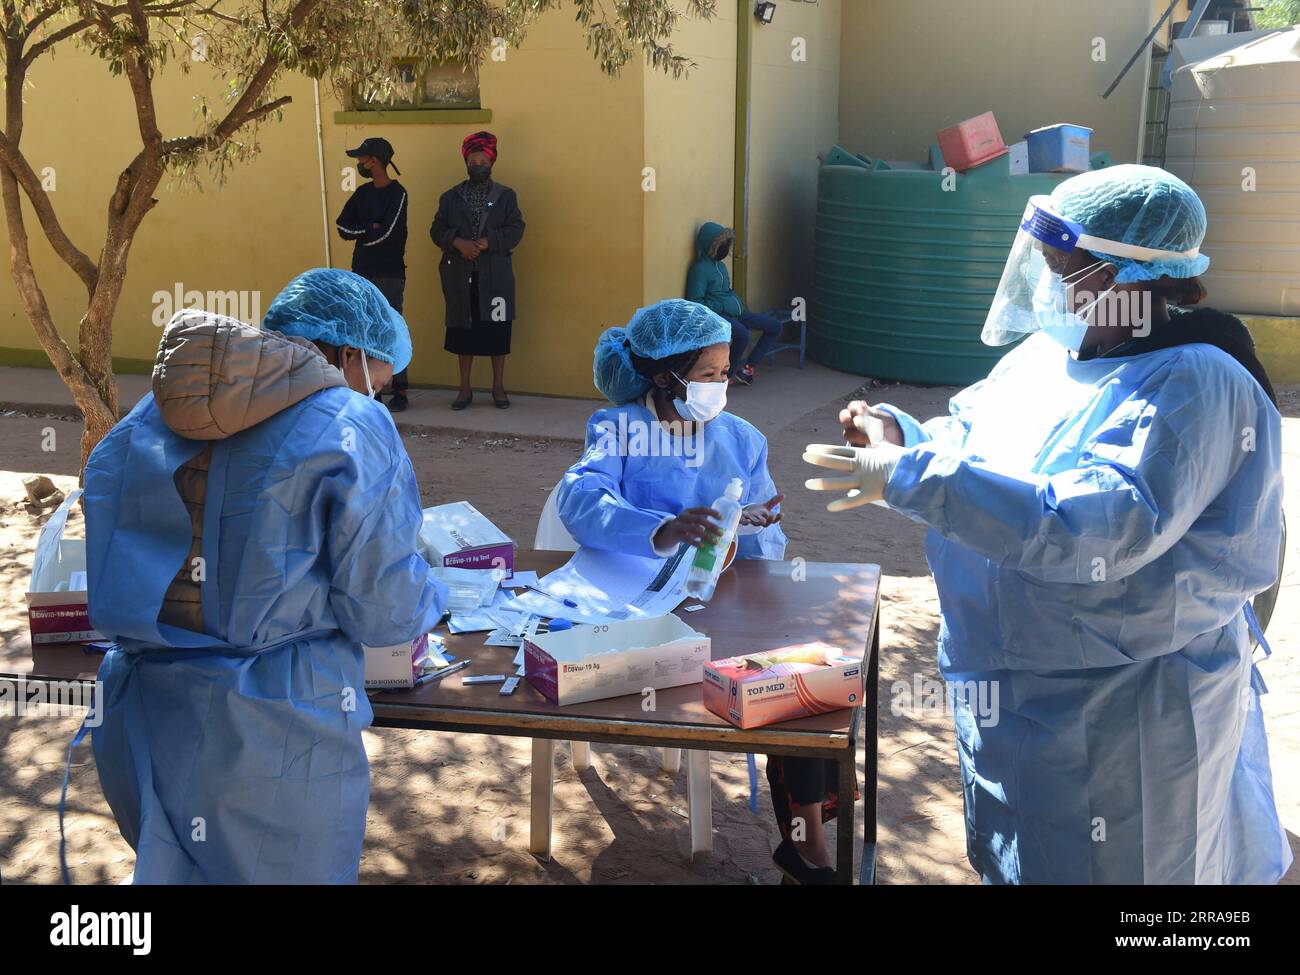 210722 -- KWENENG DISTRICT BOTSWANA, July 22, 2021 -- Nurses work at a vaccinating and testing center in Kweneng District, Botswana, on July 22, 2021. Botswana s President, Mokgweetsi Masisi on Thursday urged citizens to get COVID-19 vaccines when their turn came, stating that all of the vaccines had been tested and approved by the appropriate authorities. Photo by /Xinhua BOTSWANA-KWENENG DISTRICT-VACCINATION ROLLOUT TshekisoxTebalo PUBLICATIONxNOTxINxCHN Stock Photo